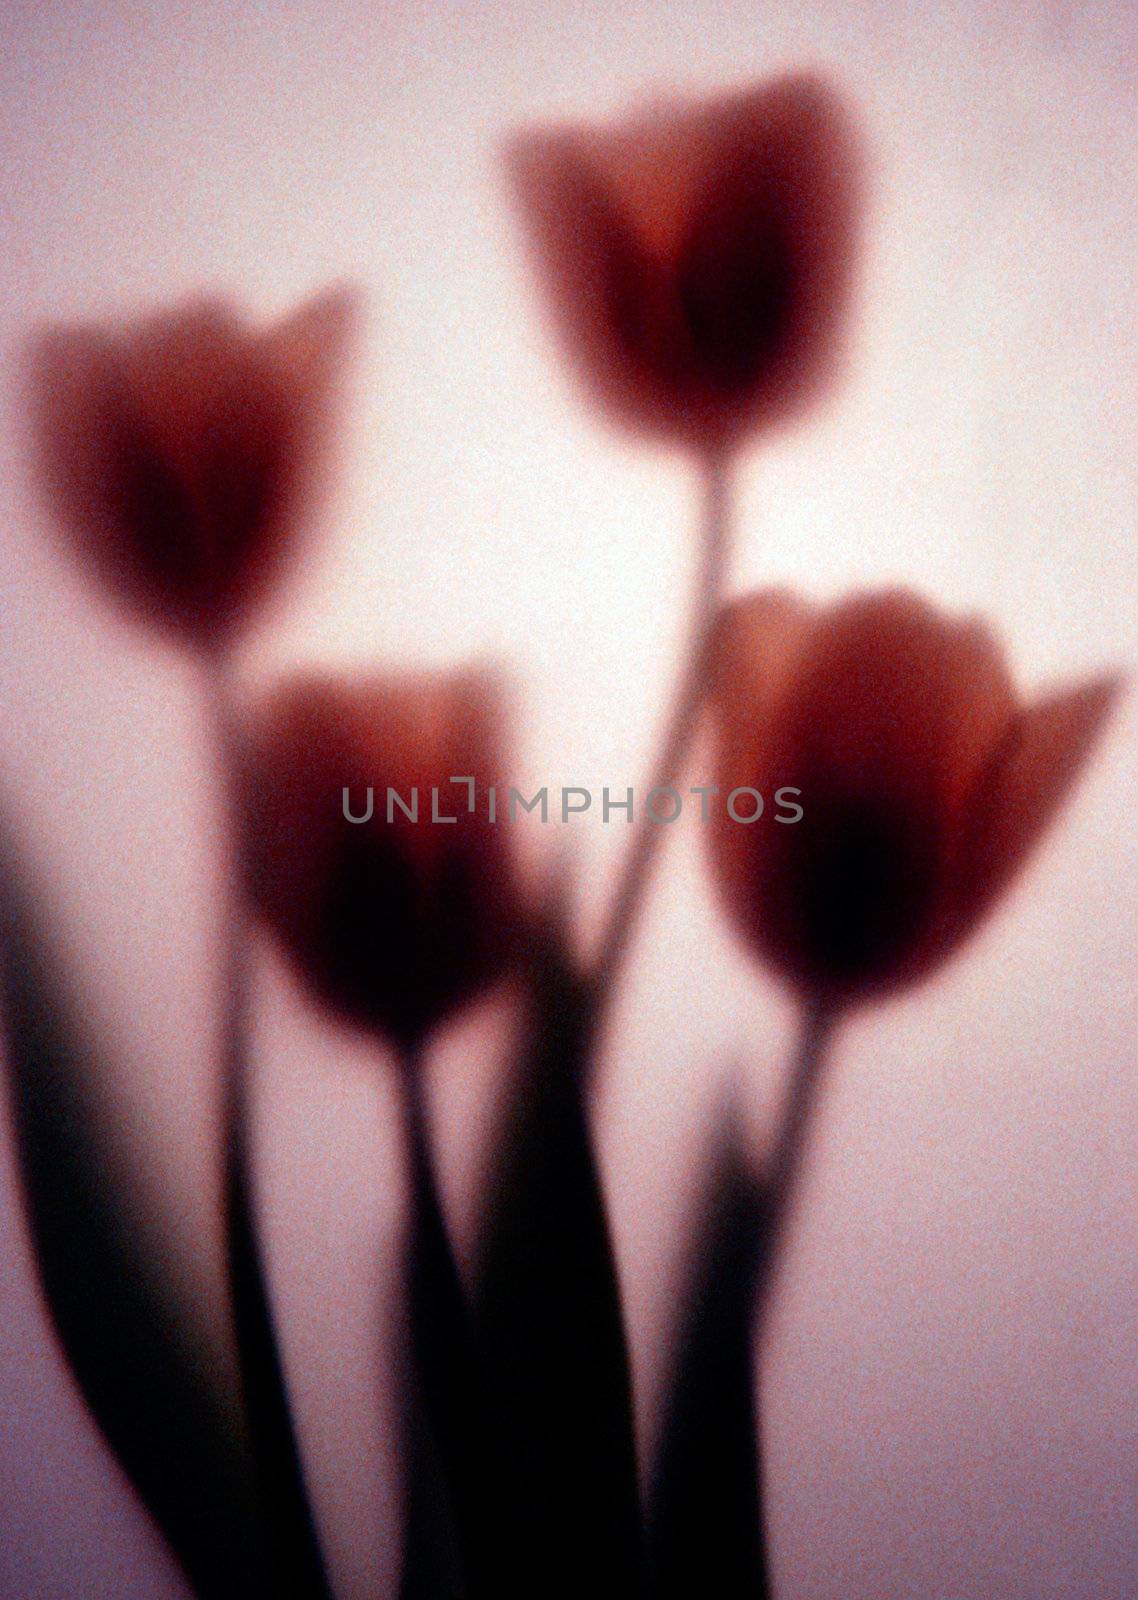 Four tulips photographed behind art paper